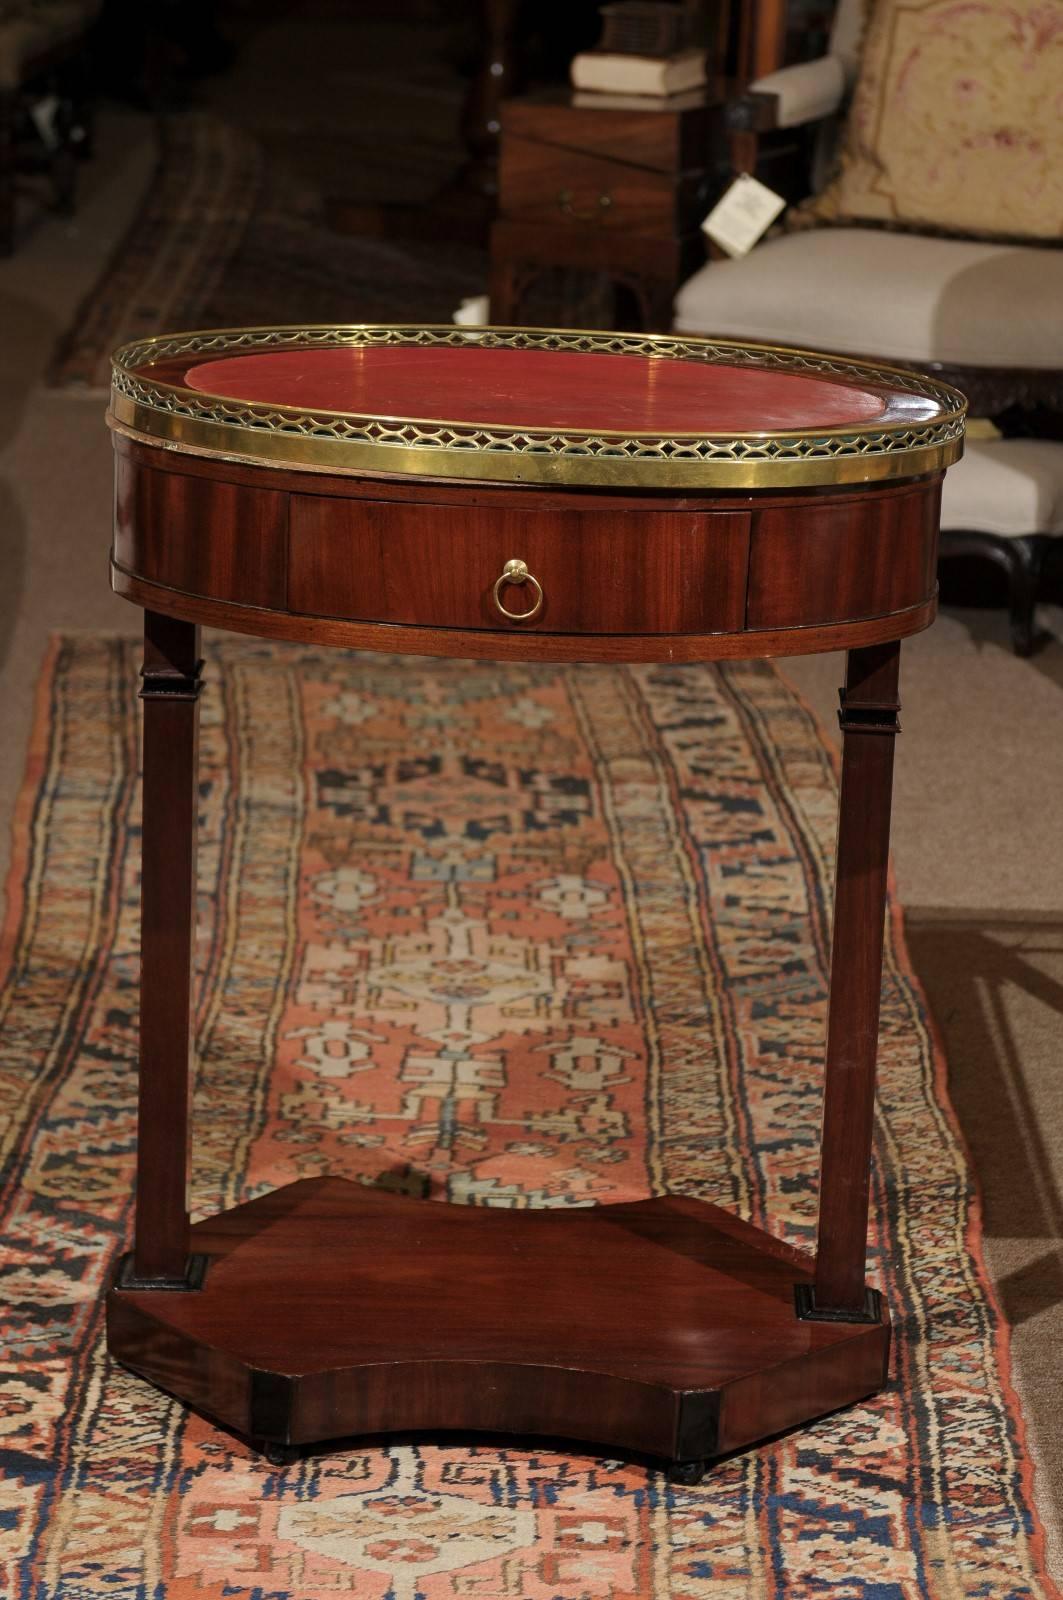 19th century French Empire mahogany oval table with marble top, brass gallery and red leather inset.